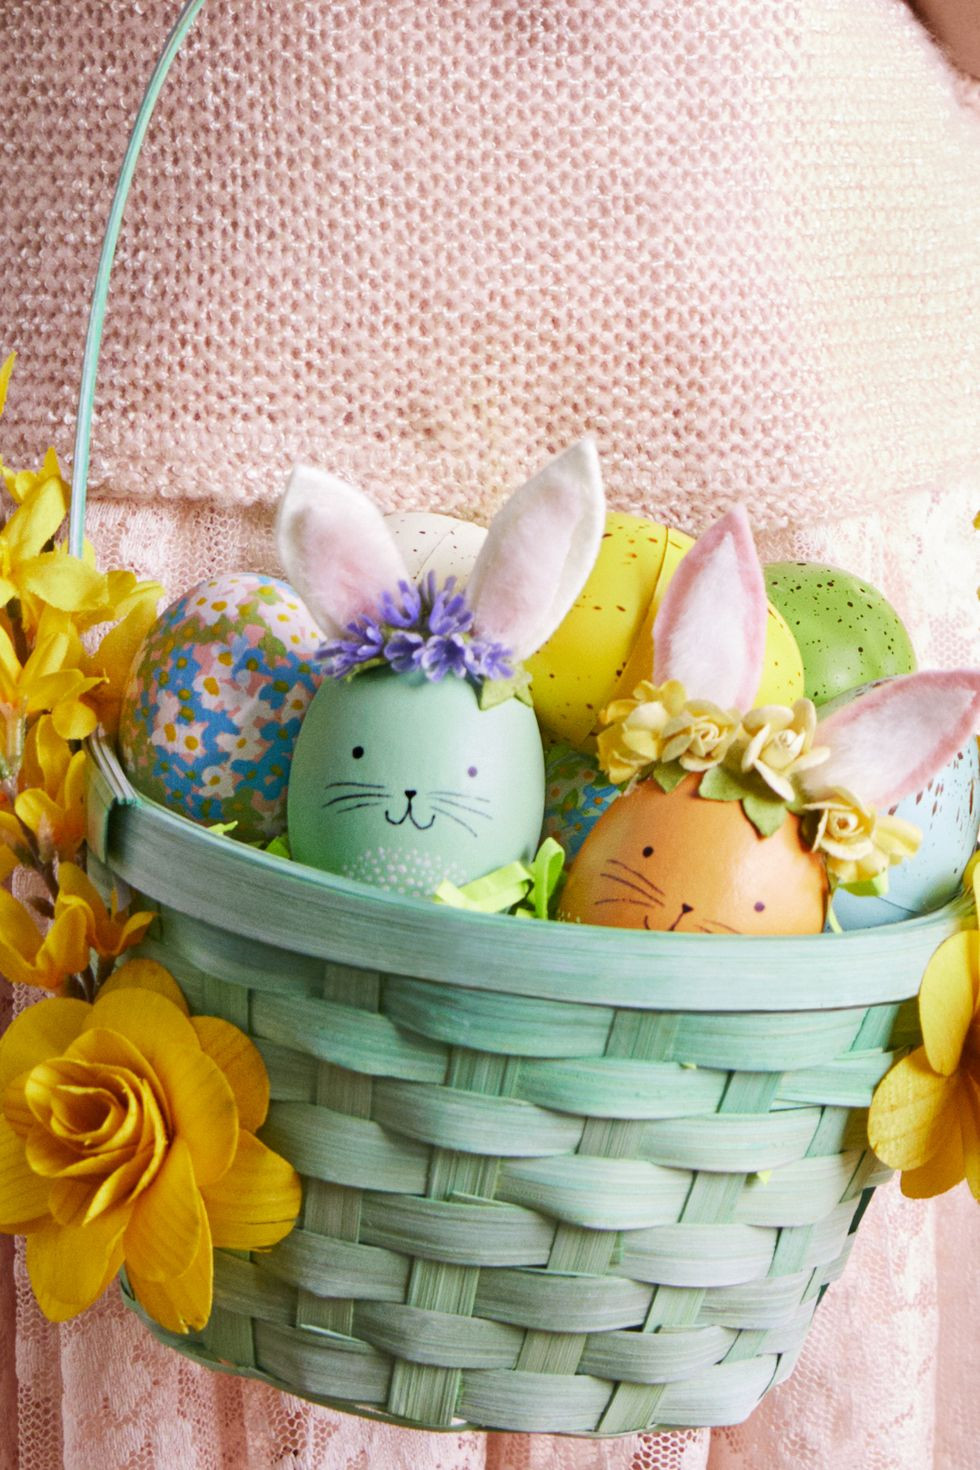 Easter Eggs Ideas
 15 Easy and Creative Easter Egg Decorating Ideas